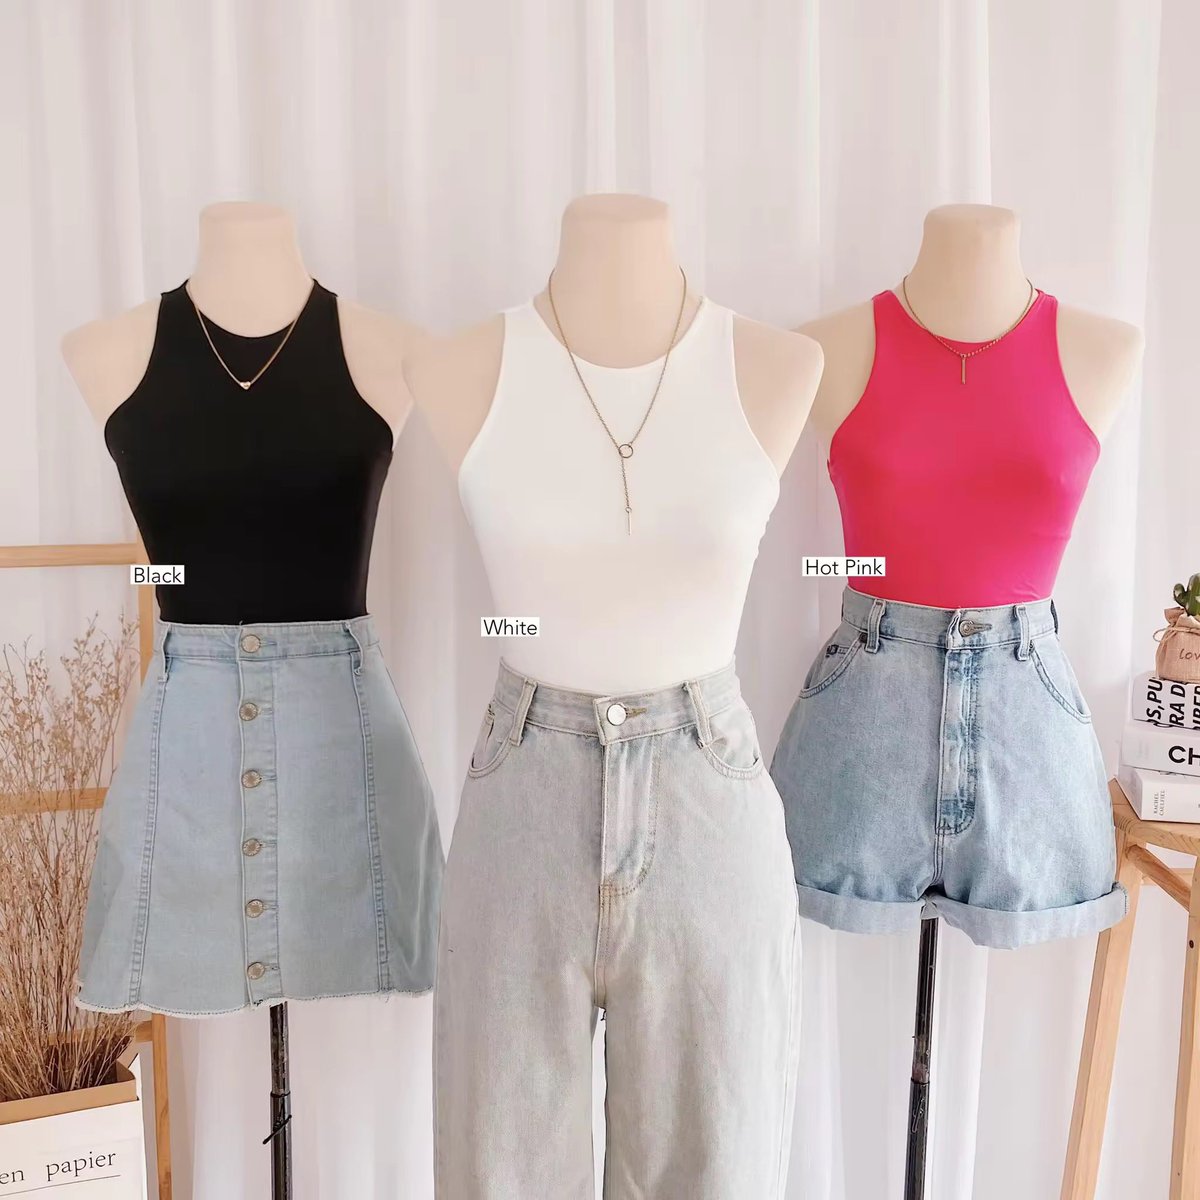 Basic Halter Top - Double Lining (Trendy Korean Inspired Fashion Indoor & Outdoor Outfit) -₱129

SHOP HERE
👉s.lazada.com.ph/s.hWKoE?cc
👉s.lazada.com.ph/s.hWKoE?cc

#womensfashionstyle #WomensFashionTrends #trendingproducts #trendingclothes #summeroutfit #homebuddiesph